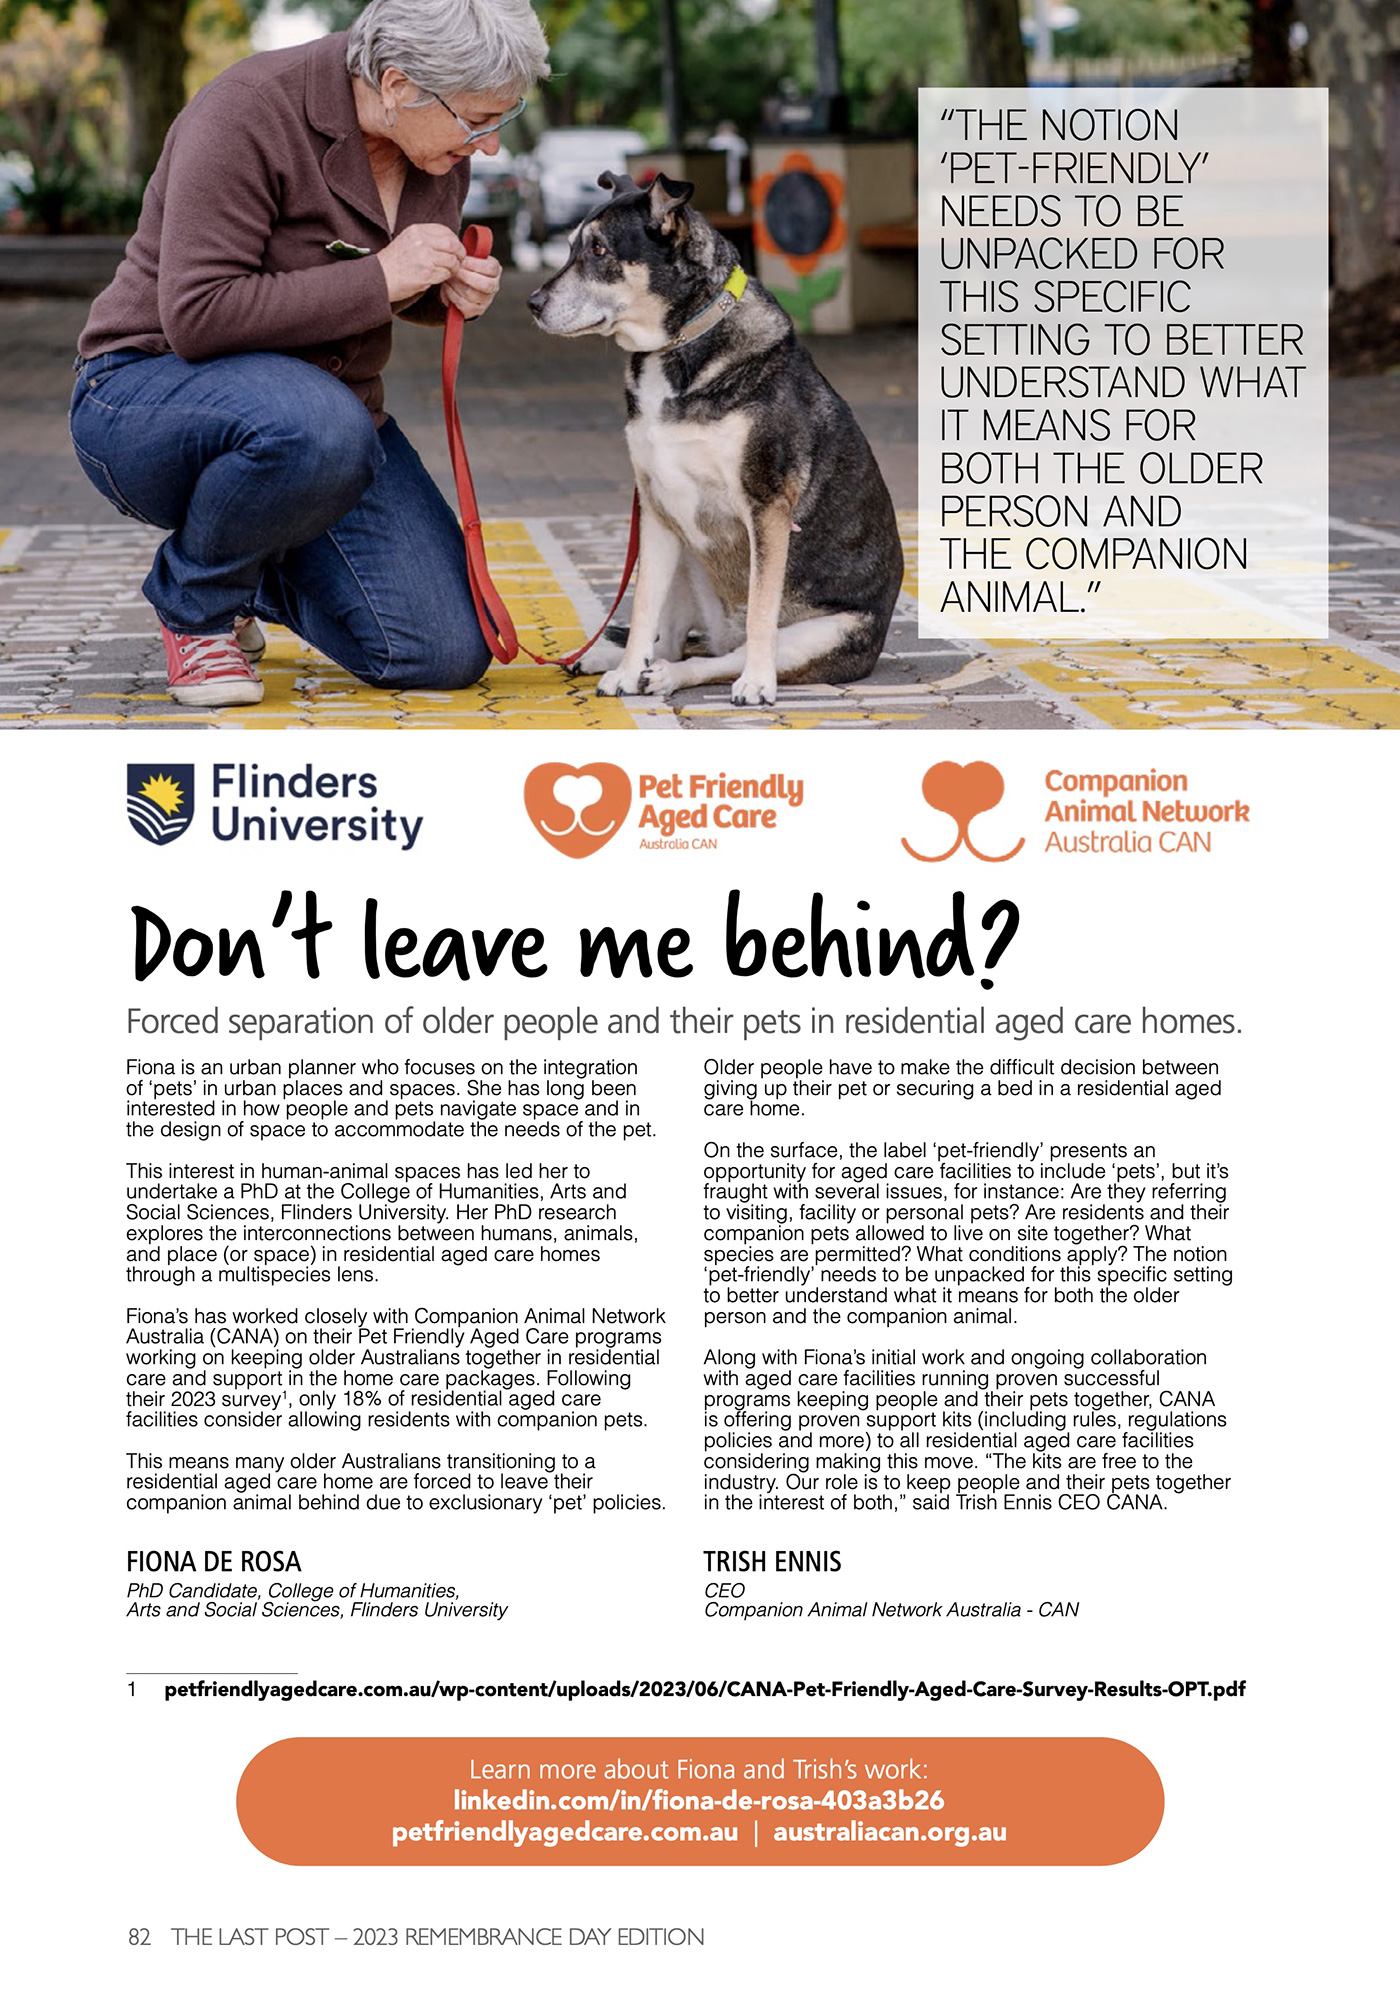 Don't leave me behind: Forced separation of older people and their pets in residential aged care homes - Article in The Last Post Magazine